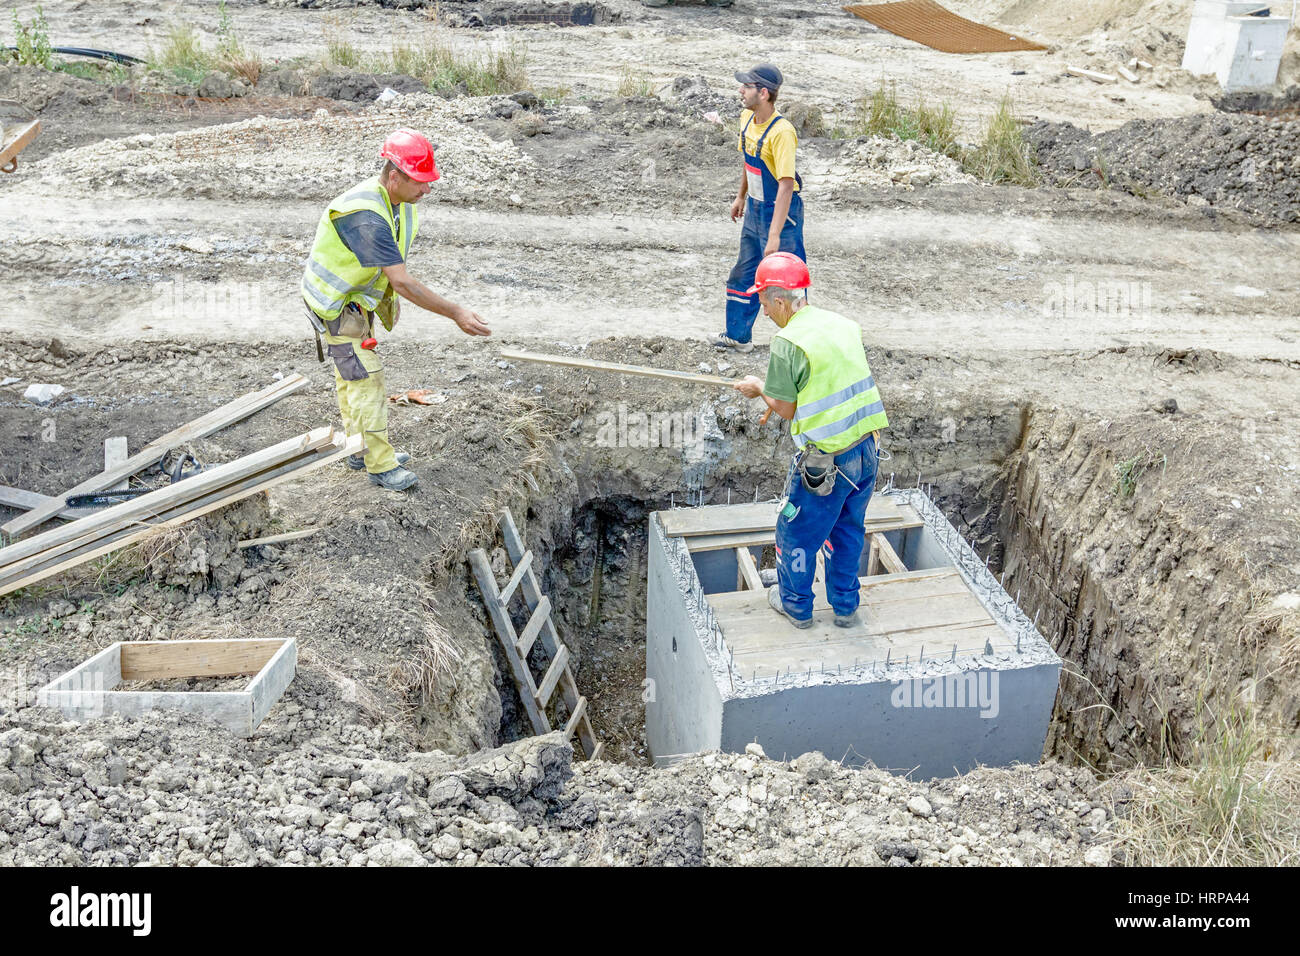 Zrenjanin, Vojvodina, Serbia - June 29, 2015: Construction workers are preparing wooden mold for concrete pouring slab on utility hole. Stock Photo